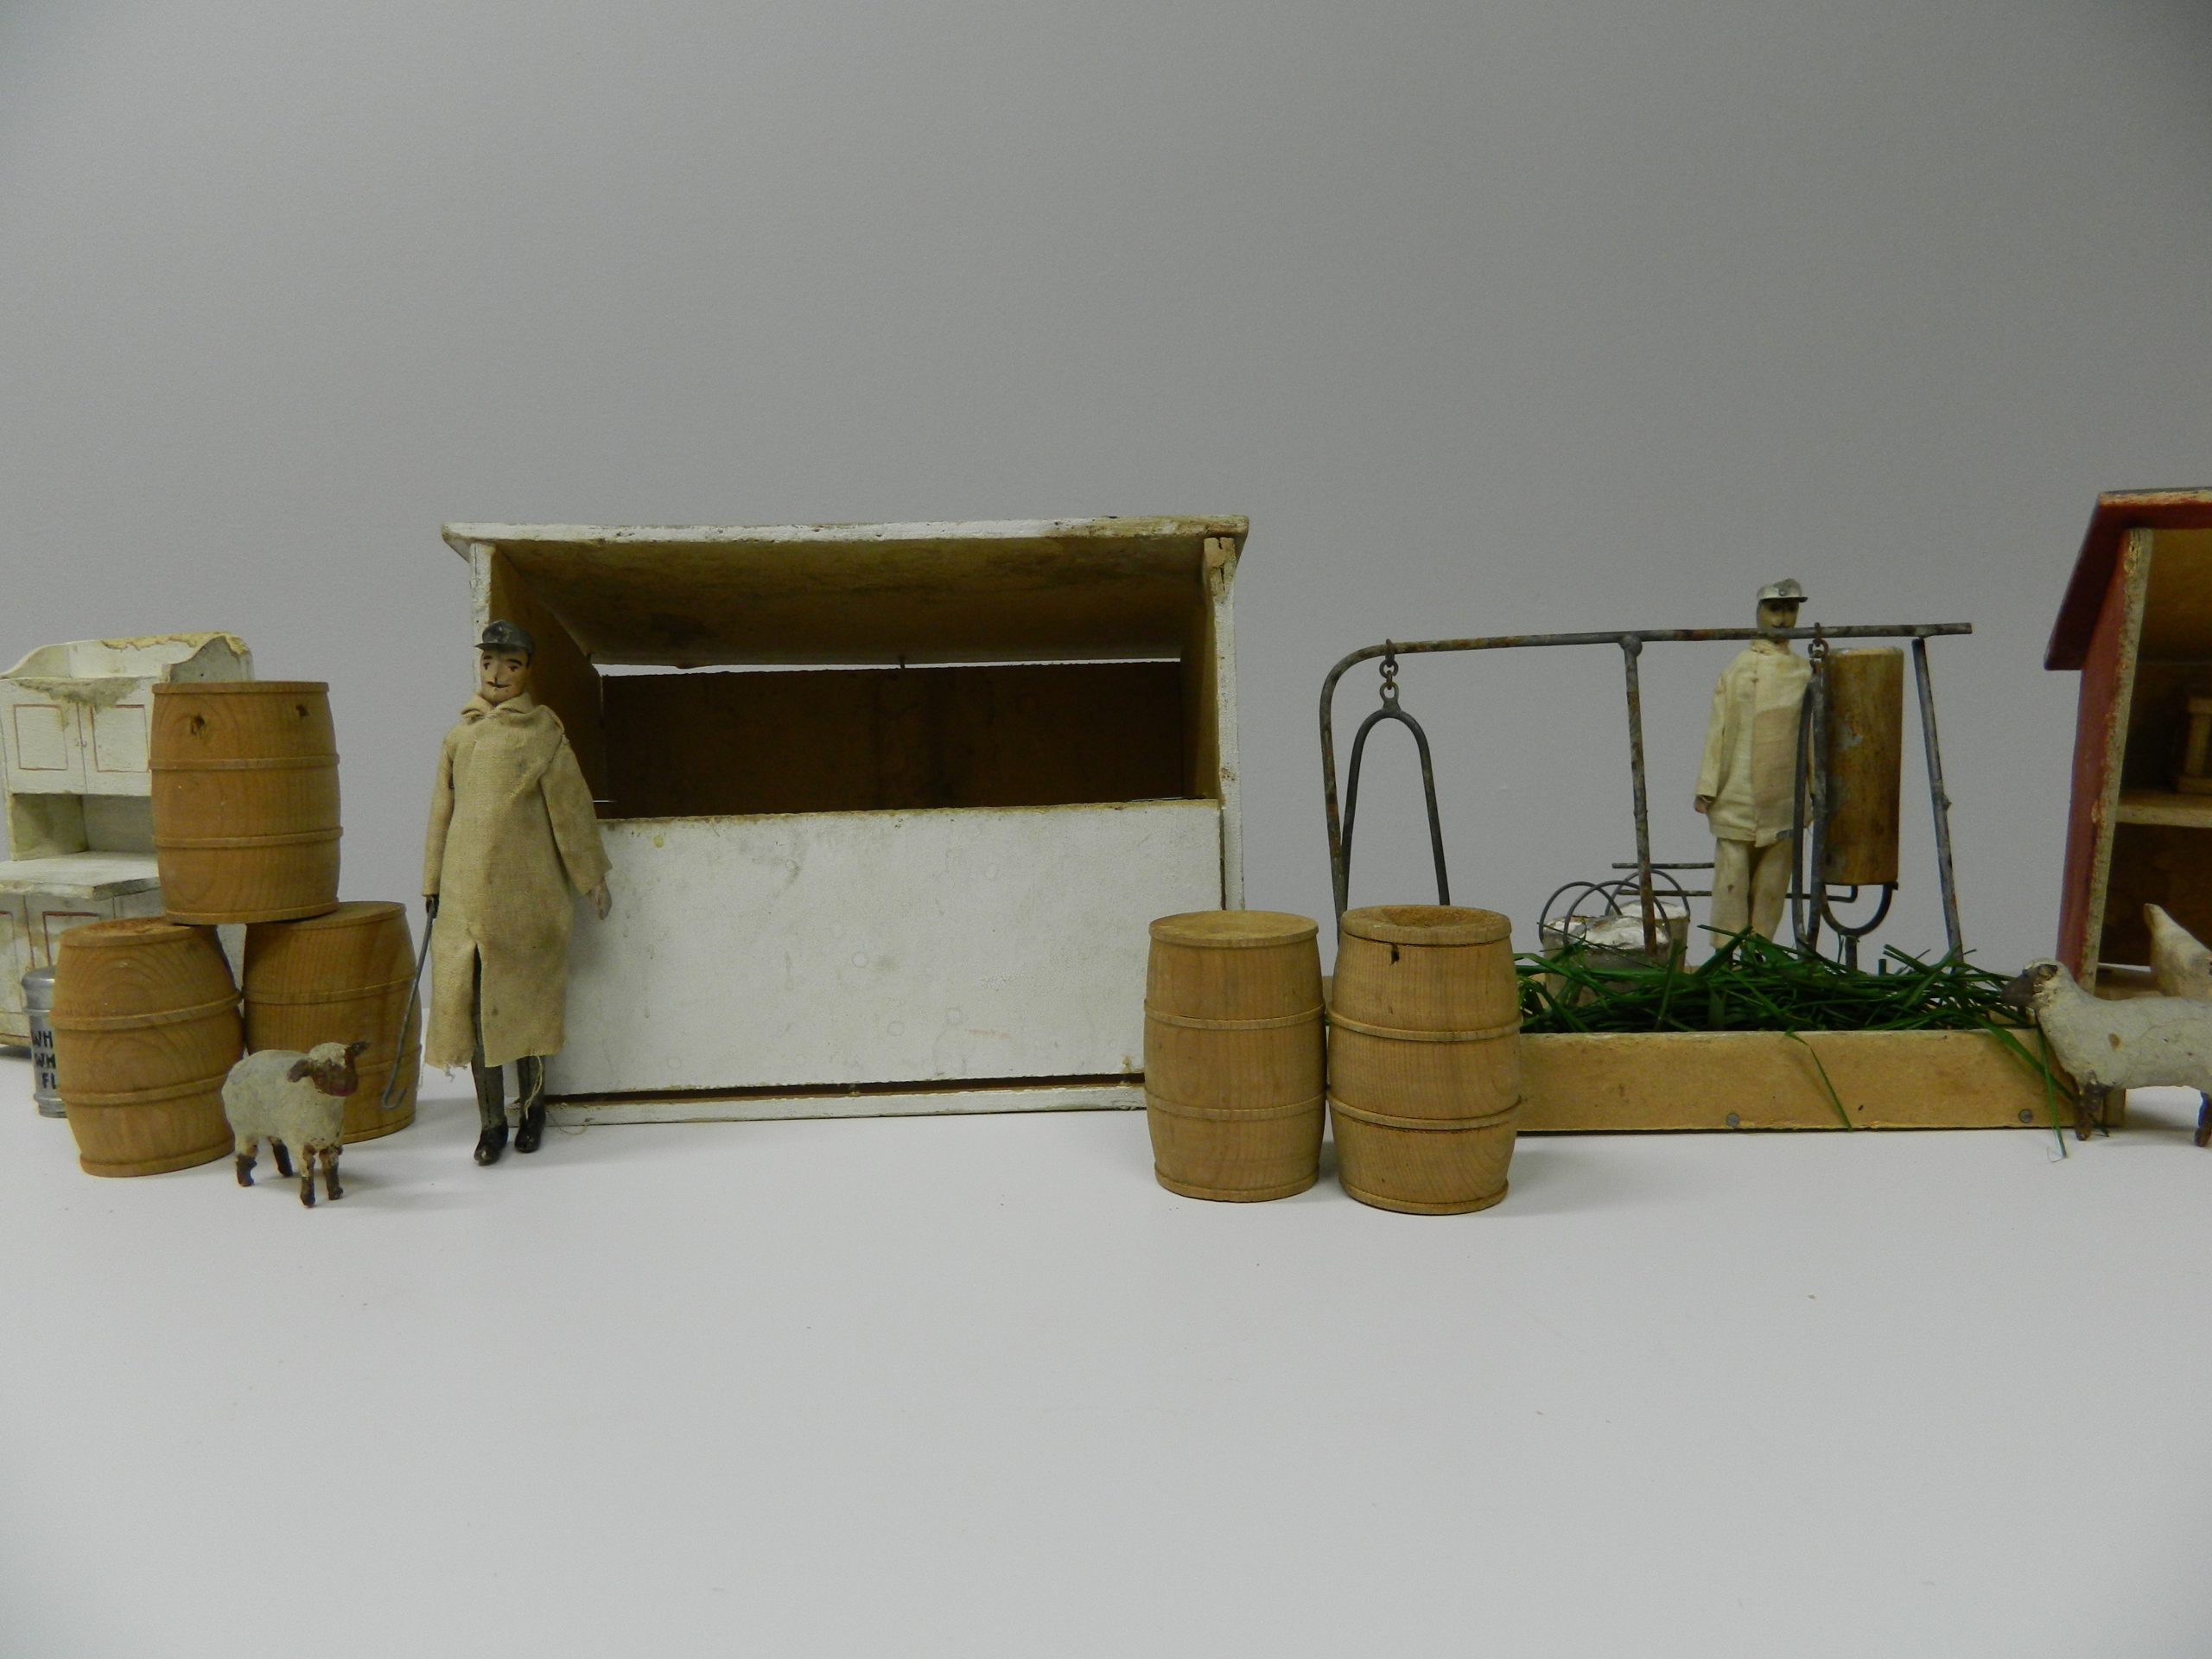 Model farm layout - horse shed and milking station